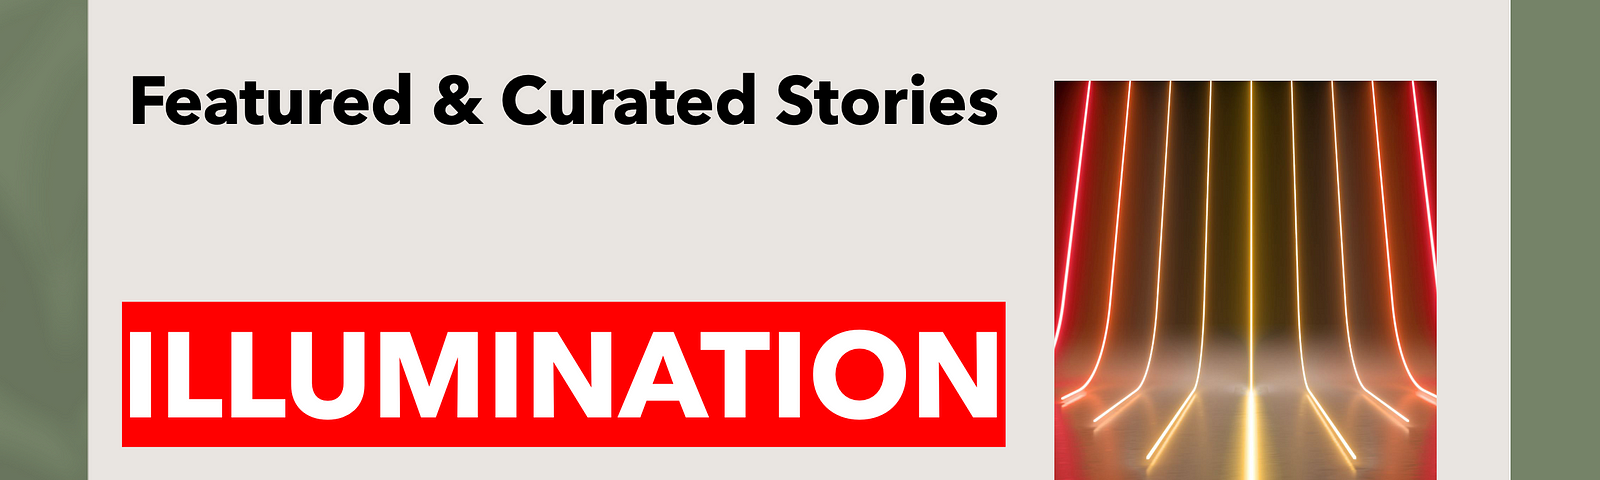 Stories Chosen by Editors Why ILLUMINATION Integrated Publications Feature Stories Editors’ choices are in place. We offer a unique curation and visibility service for storytellers on Medium. Compiled by Chief Editor Dr Mehmet Yildiz on Medium.com https://medium.com/me/settings/promote-subscriptions